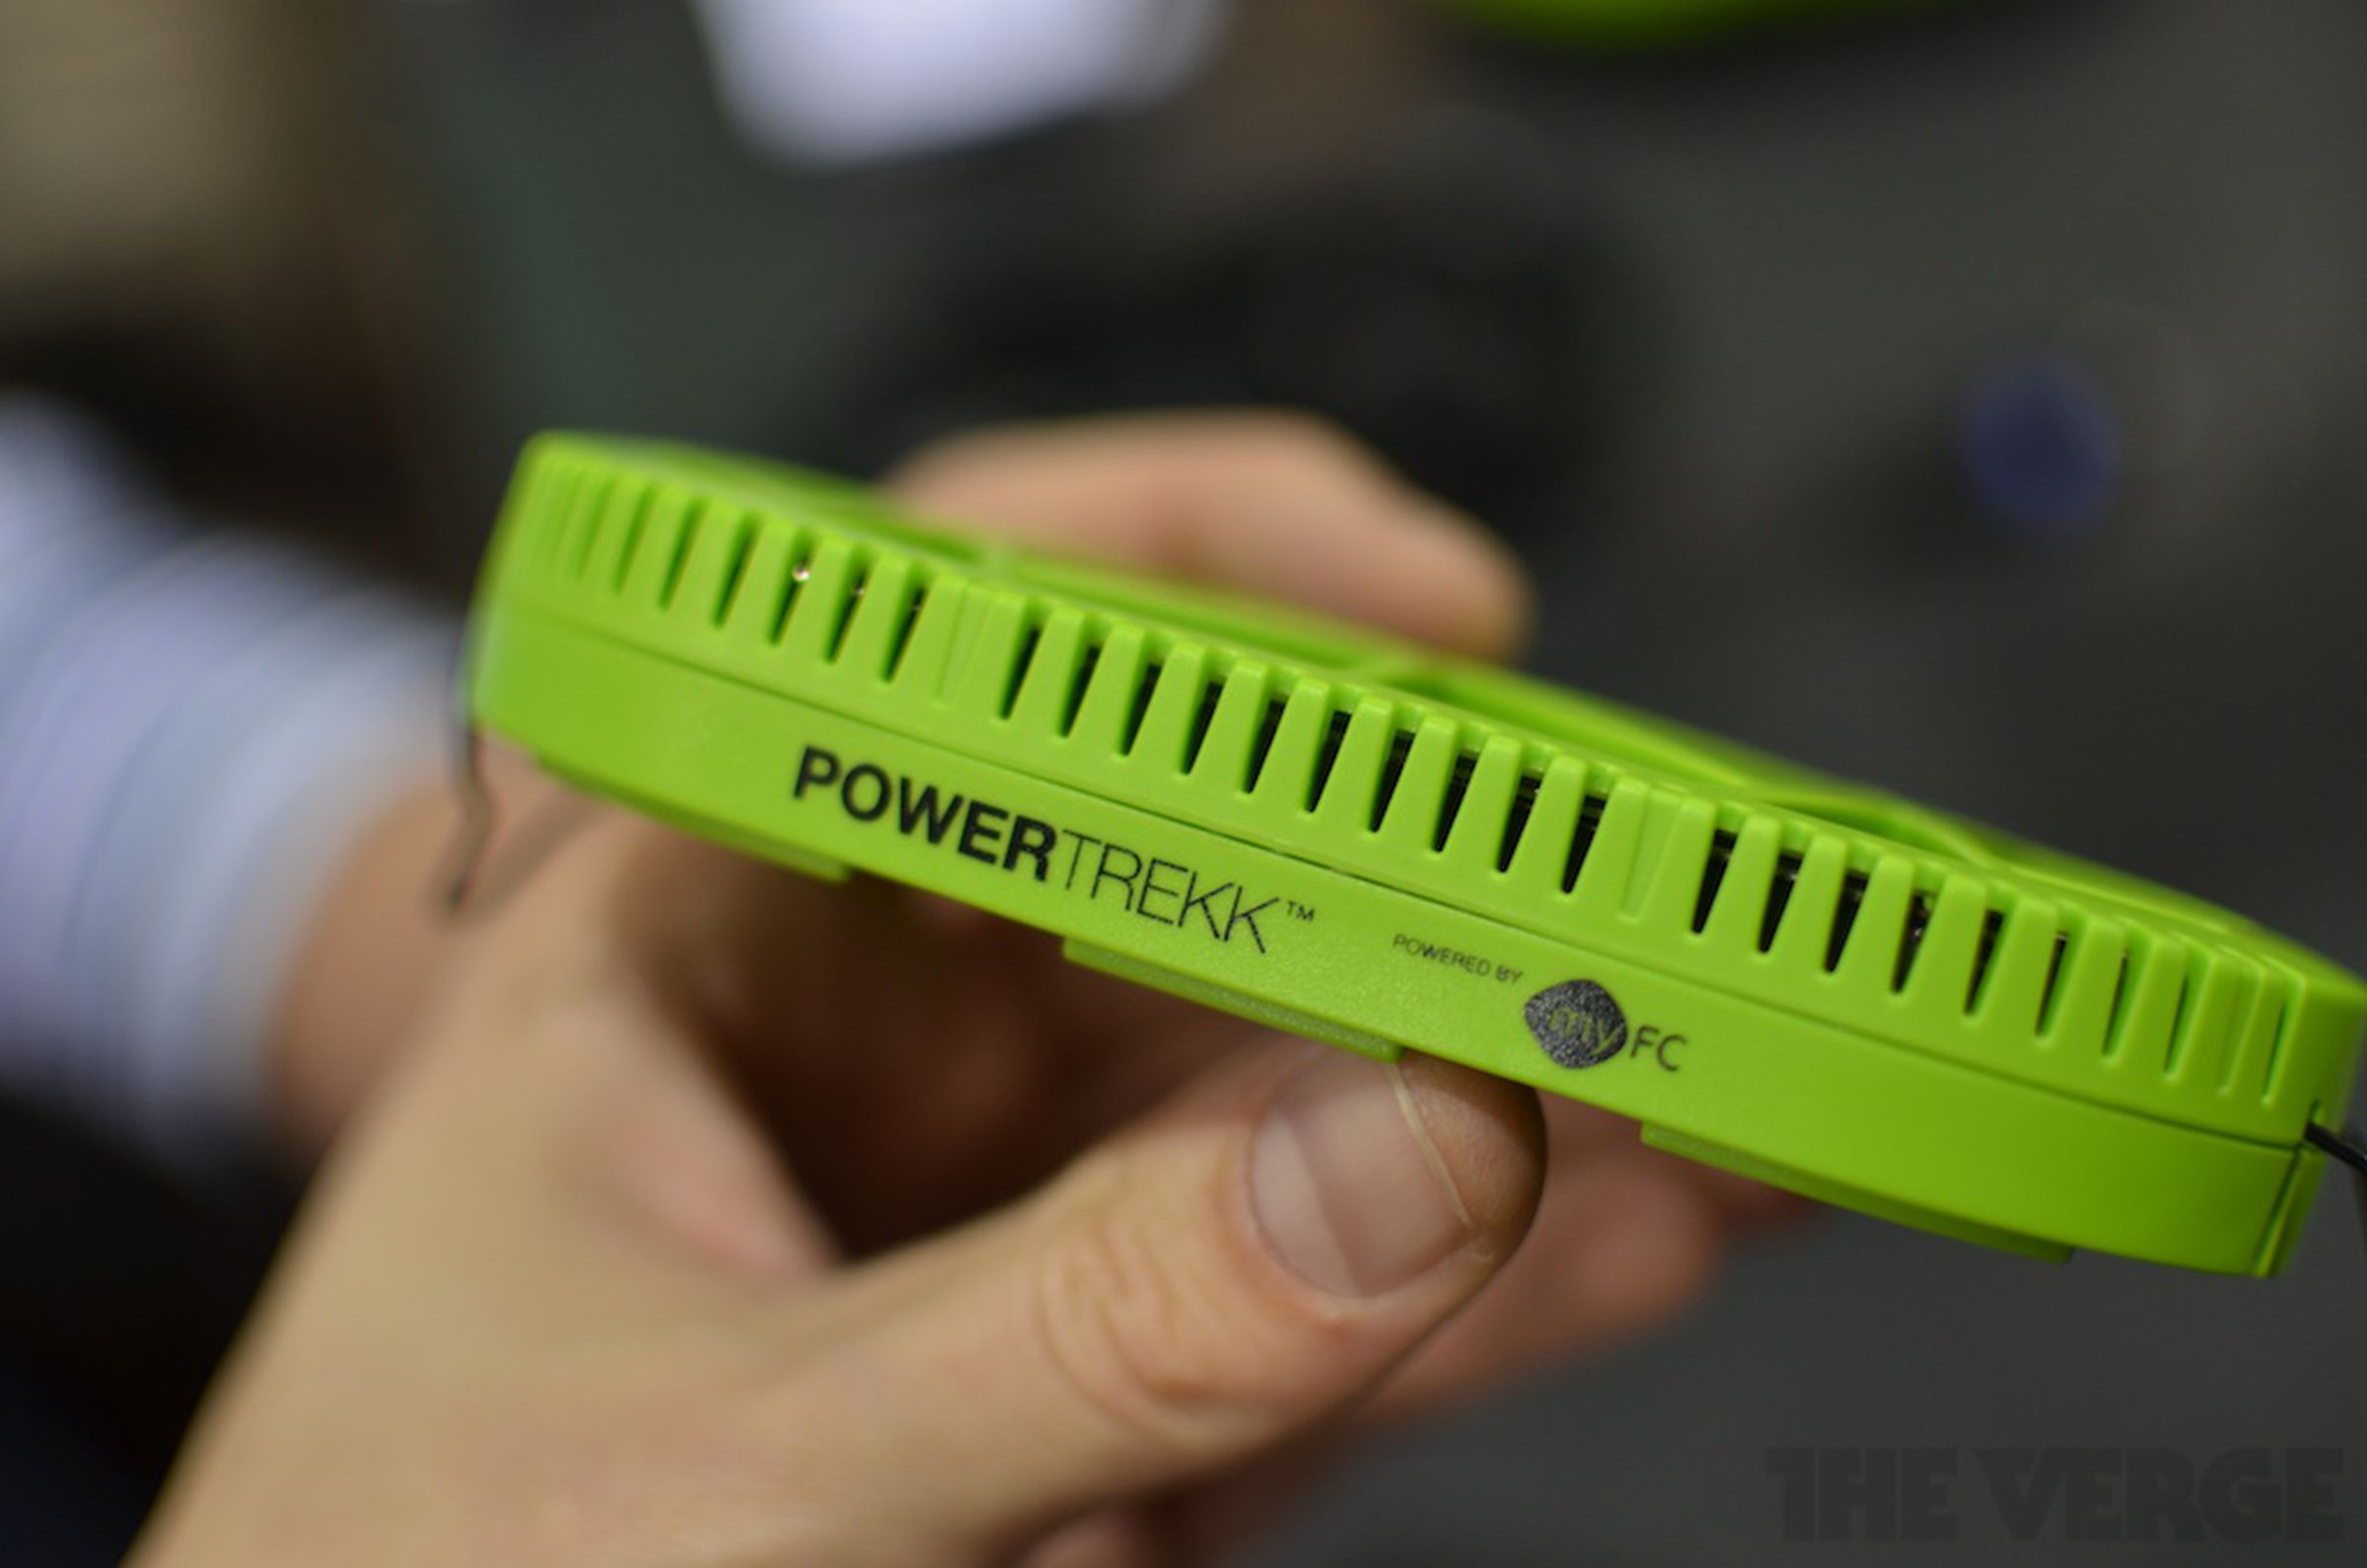 Powertrekk fuel cell charger pictures